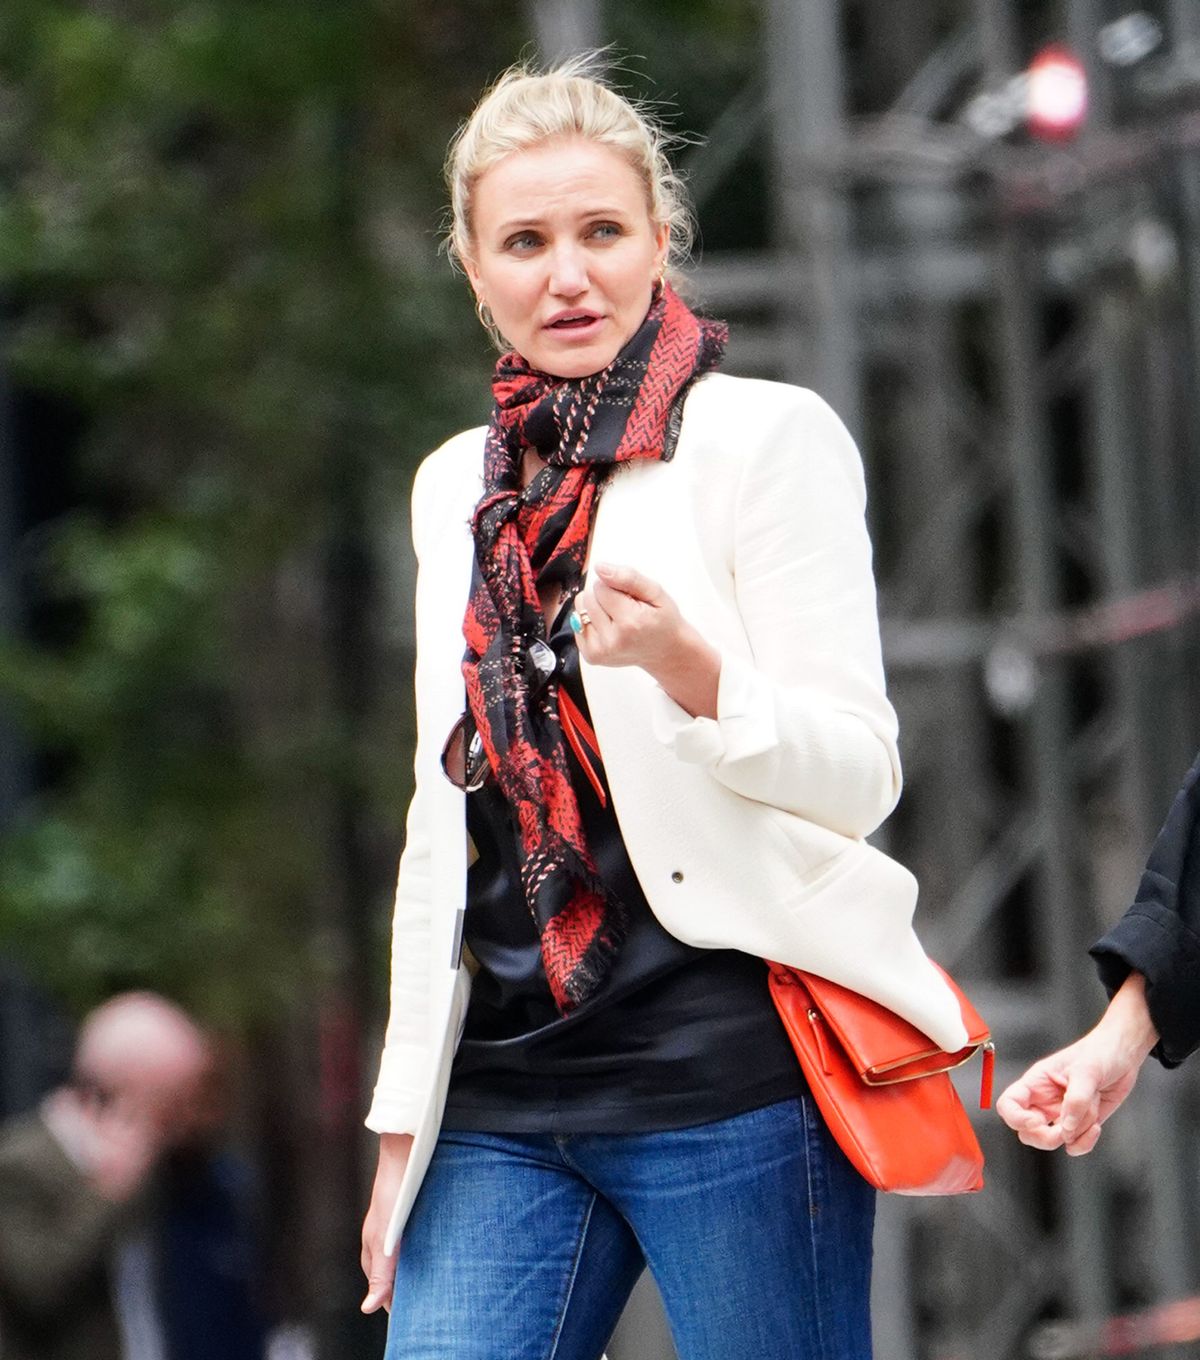 EXCLUSIVE: Cameron Diaz is Spotted Shopping with a Friend in New York City